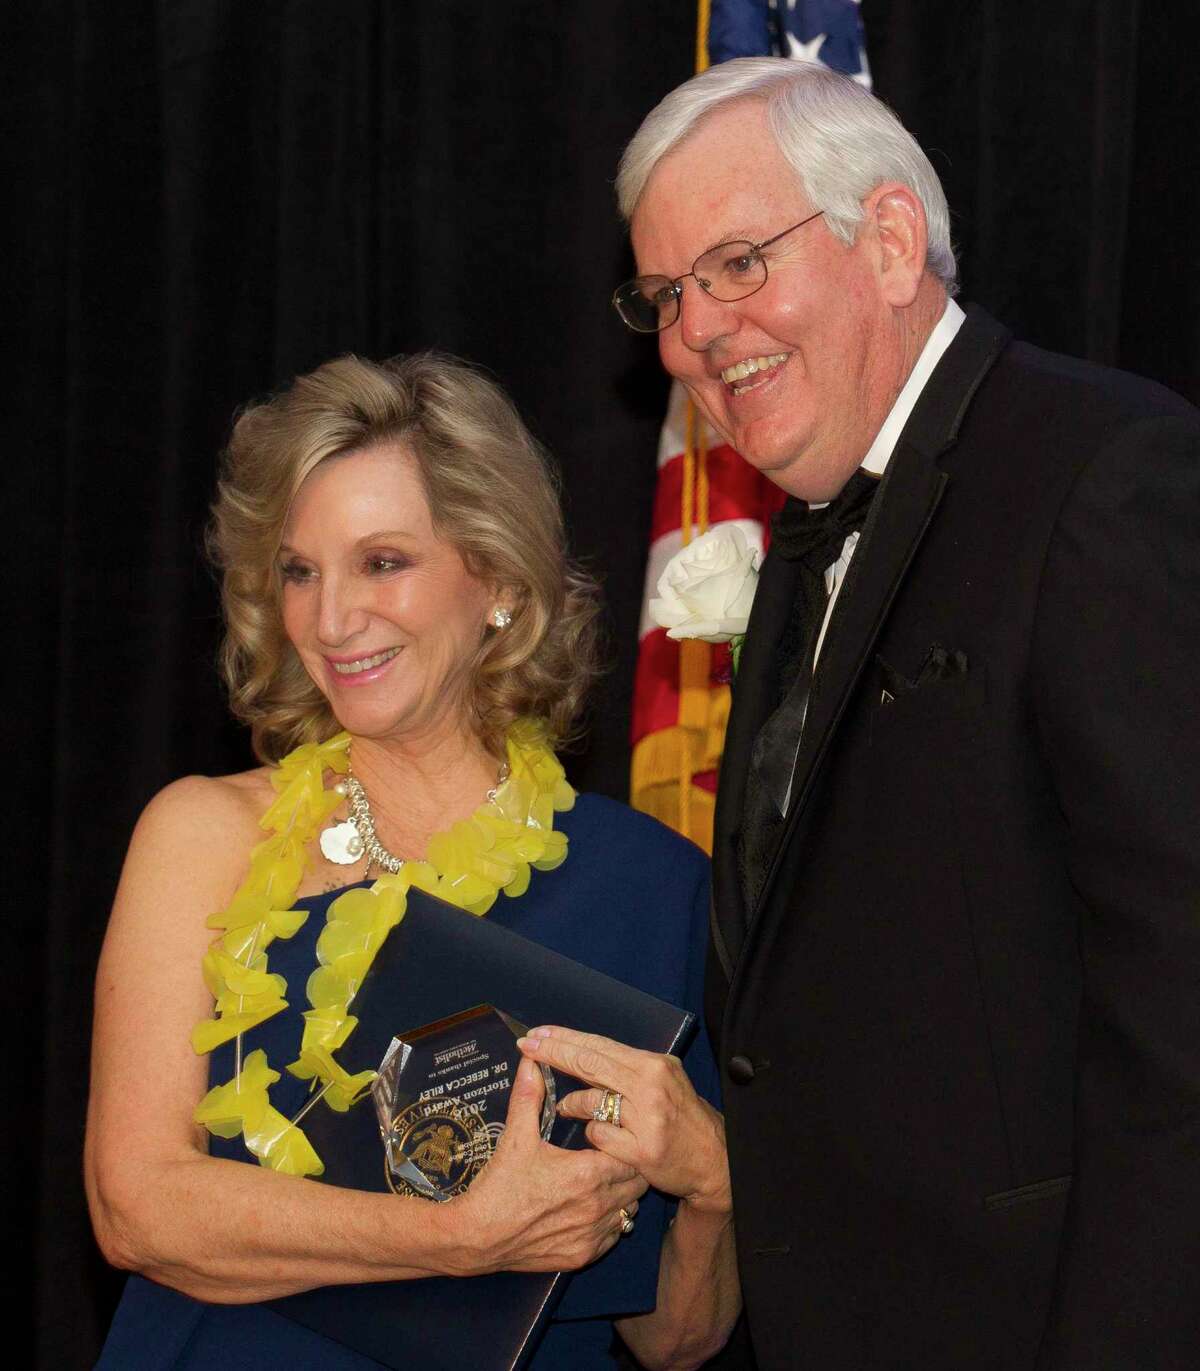 Lone Star College-Montgomery President Rebecca Riley received Horizon Award during the Conroe/Lake Conroe Chamber of Commerce’s annual Chairman’s Ball at La Torretta Lake Resort & Spa in February 2019. Riley’s tenure as Chairman of the Board will be celebrated at the 2022 Chairman’s Ball Saturday night at Margaritaville Lake Resort.